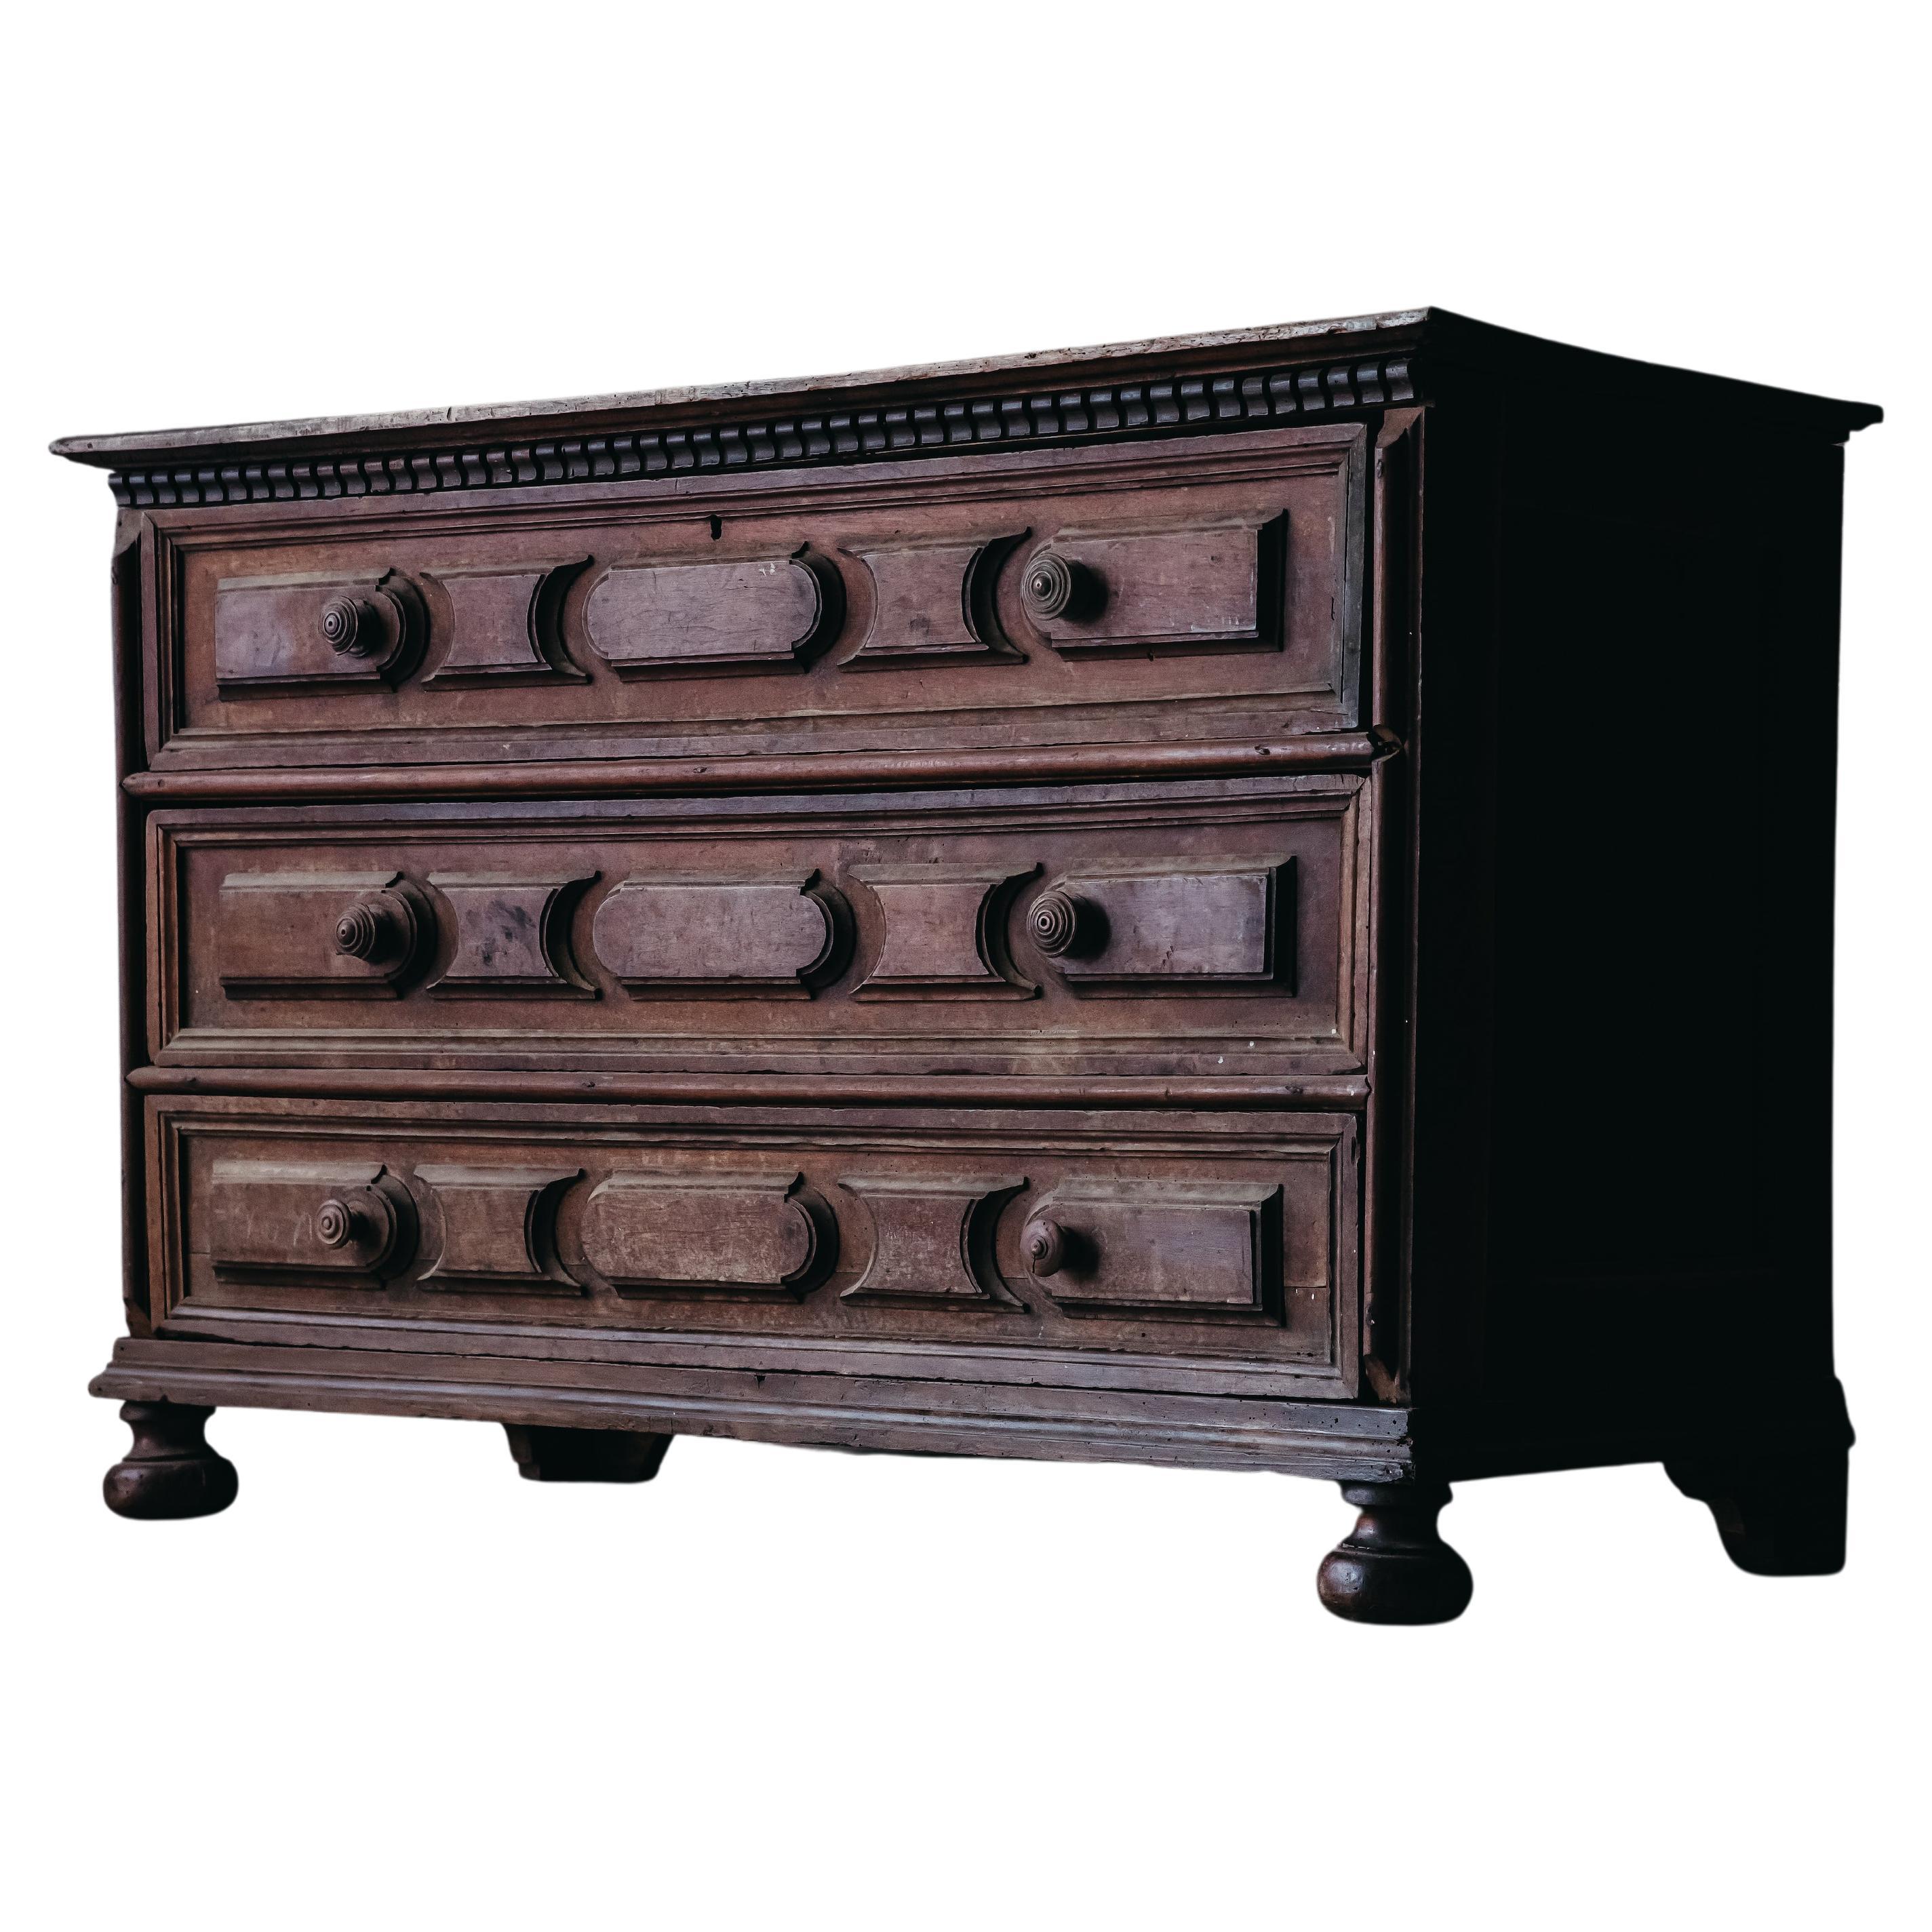 Early Walnut Chest of Drawers from Italy, circa 1800